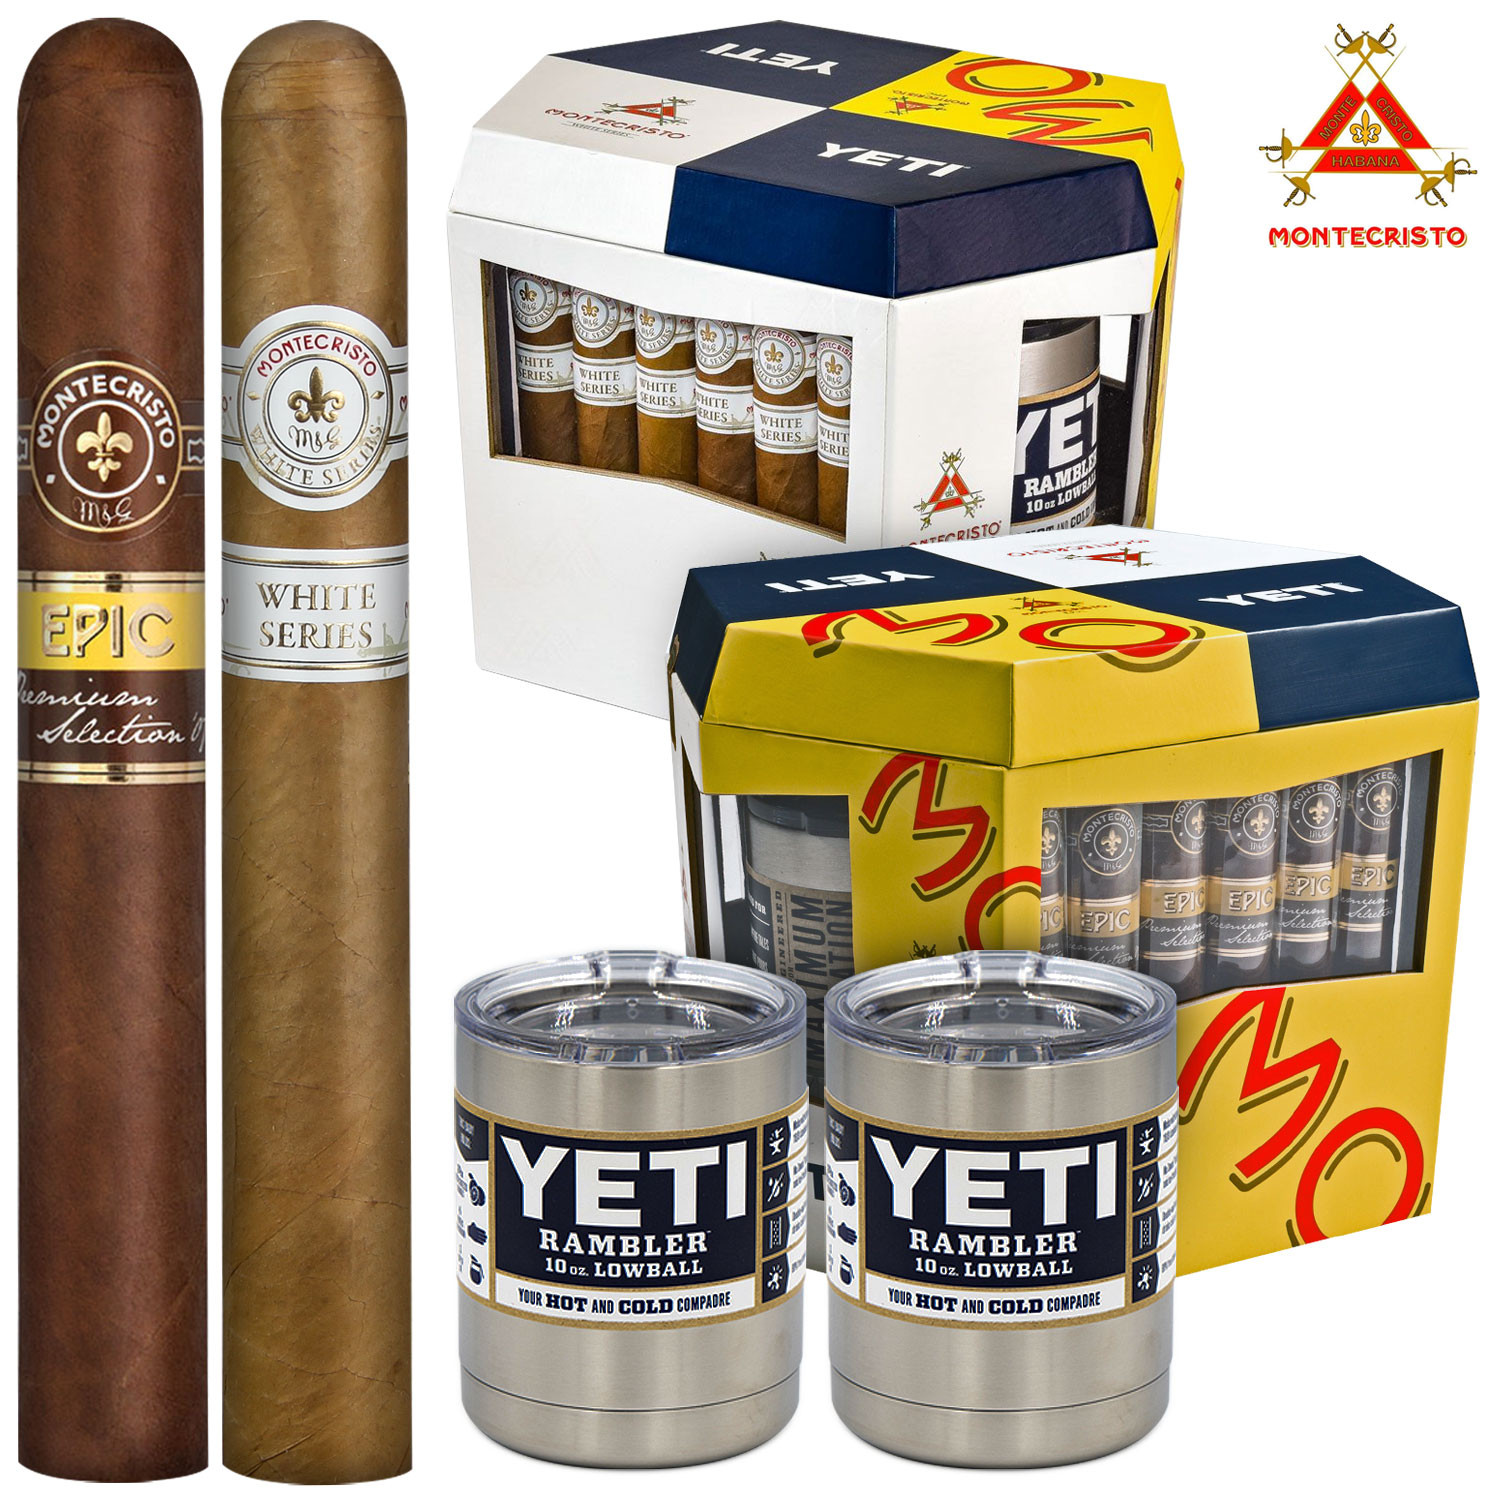 https://www.cigarpage.com/media/catalog/product/cache/9/image/9df78eab33525d08d6e5fb8d27136e95/k/p/kp-mta008-a.jpg